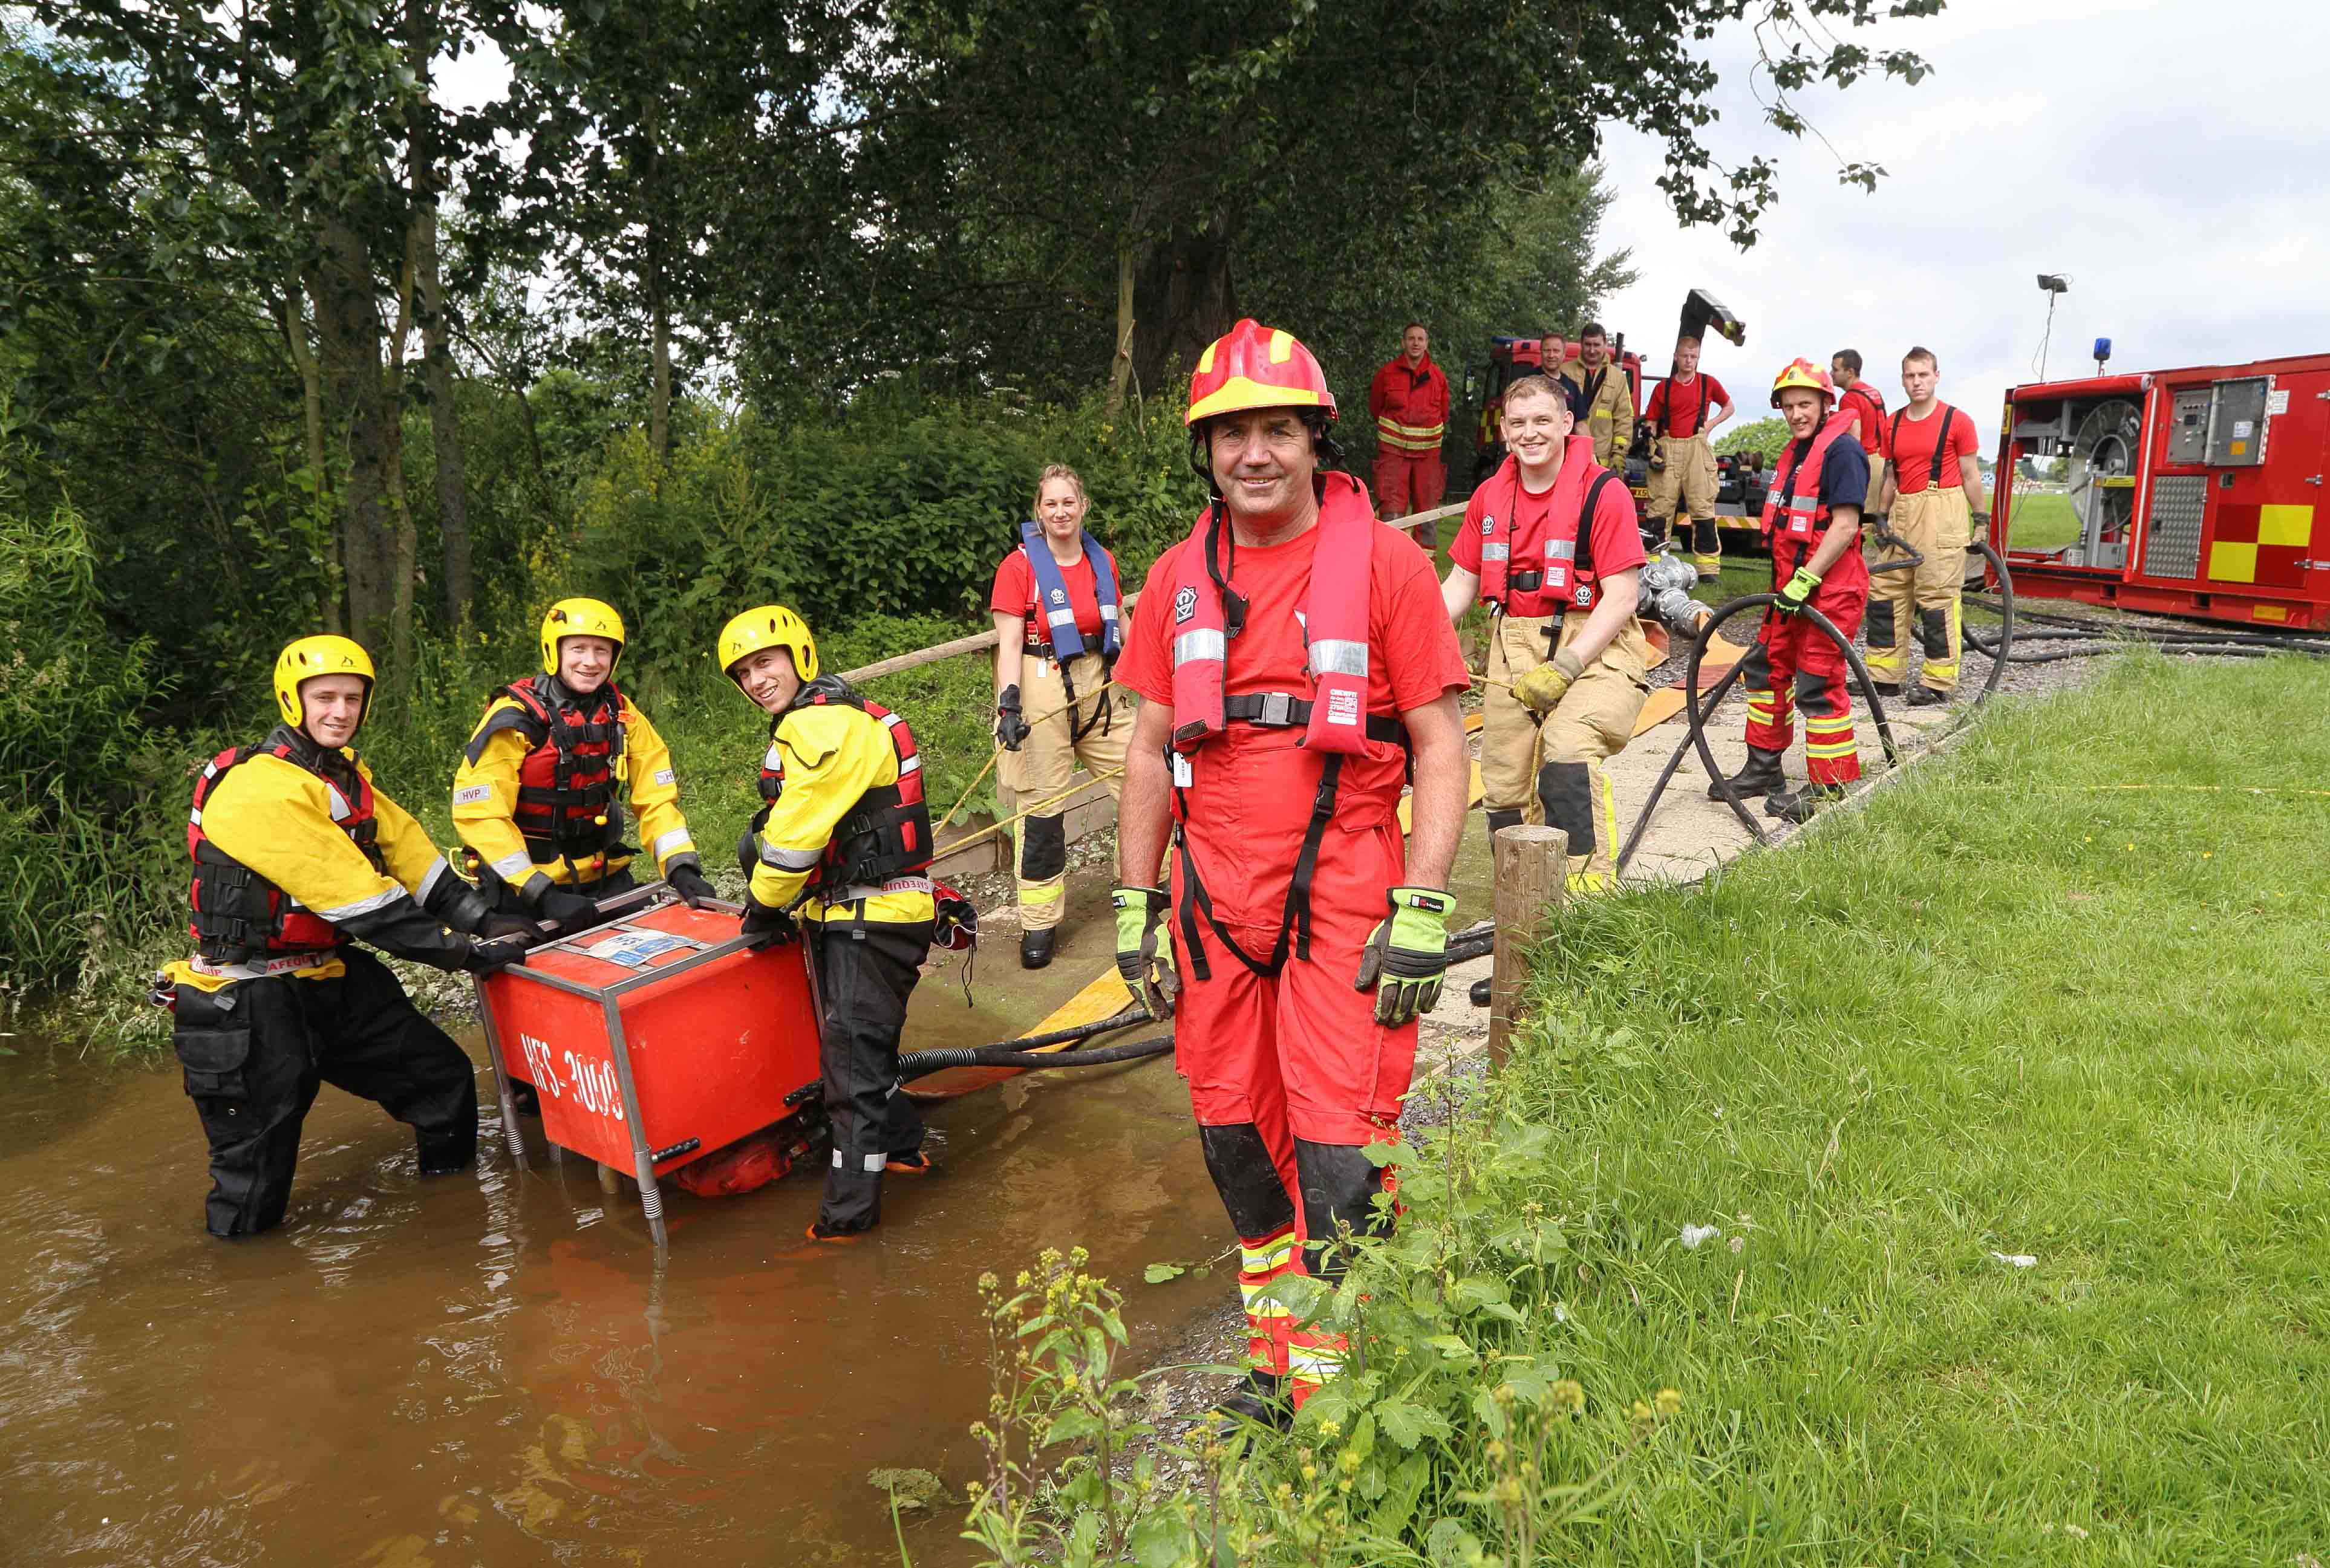 Floods Of Praise For Firefighters Shropshire Fire And Rescue Service